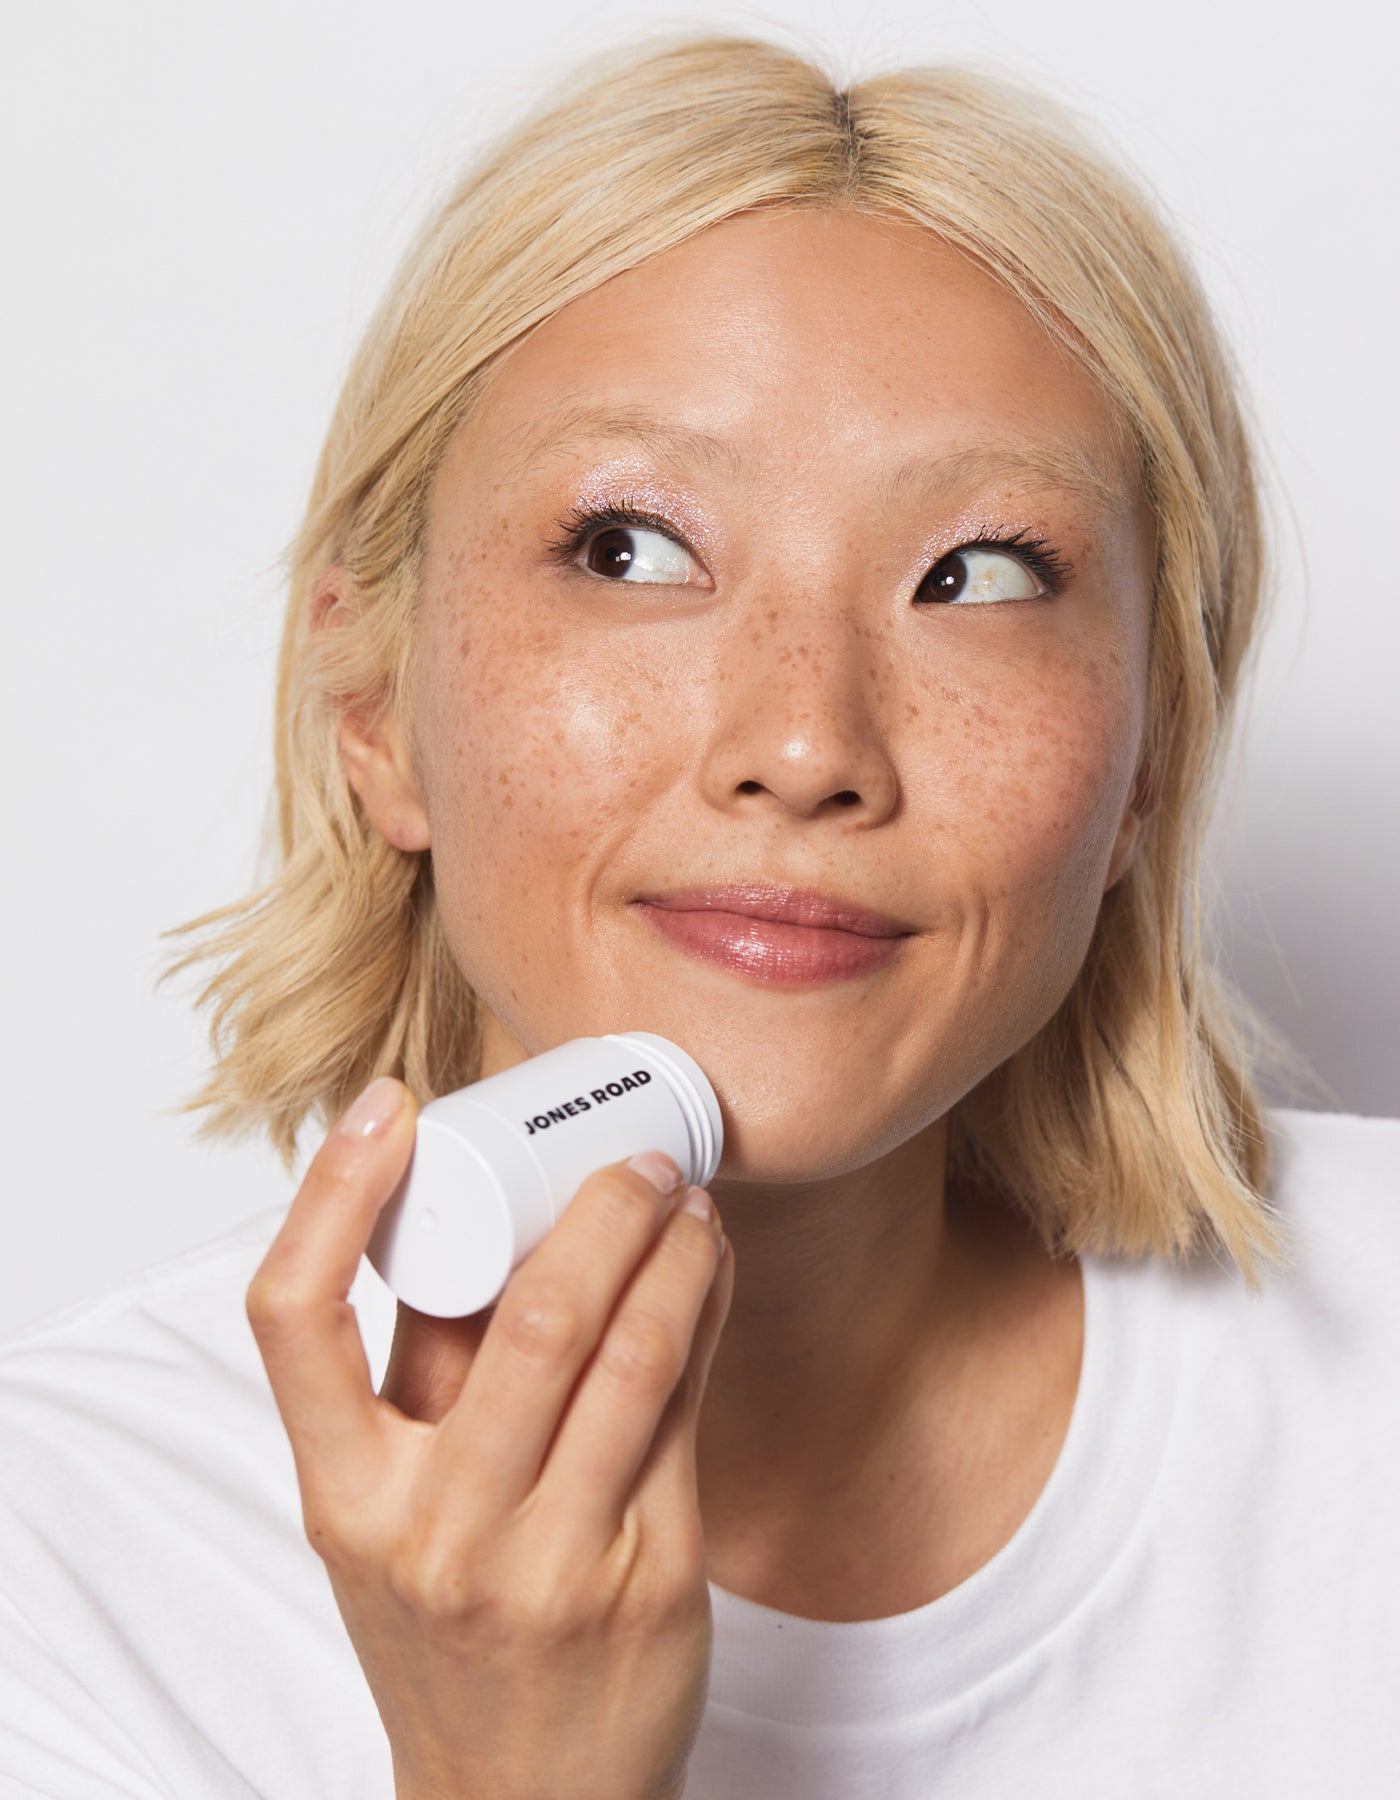 A woman using The Cleansing Stick by Jones Road